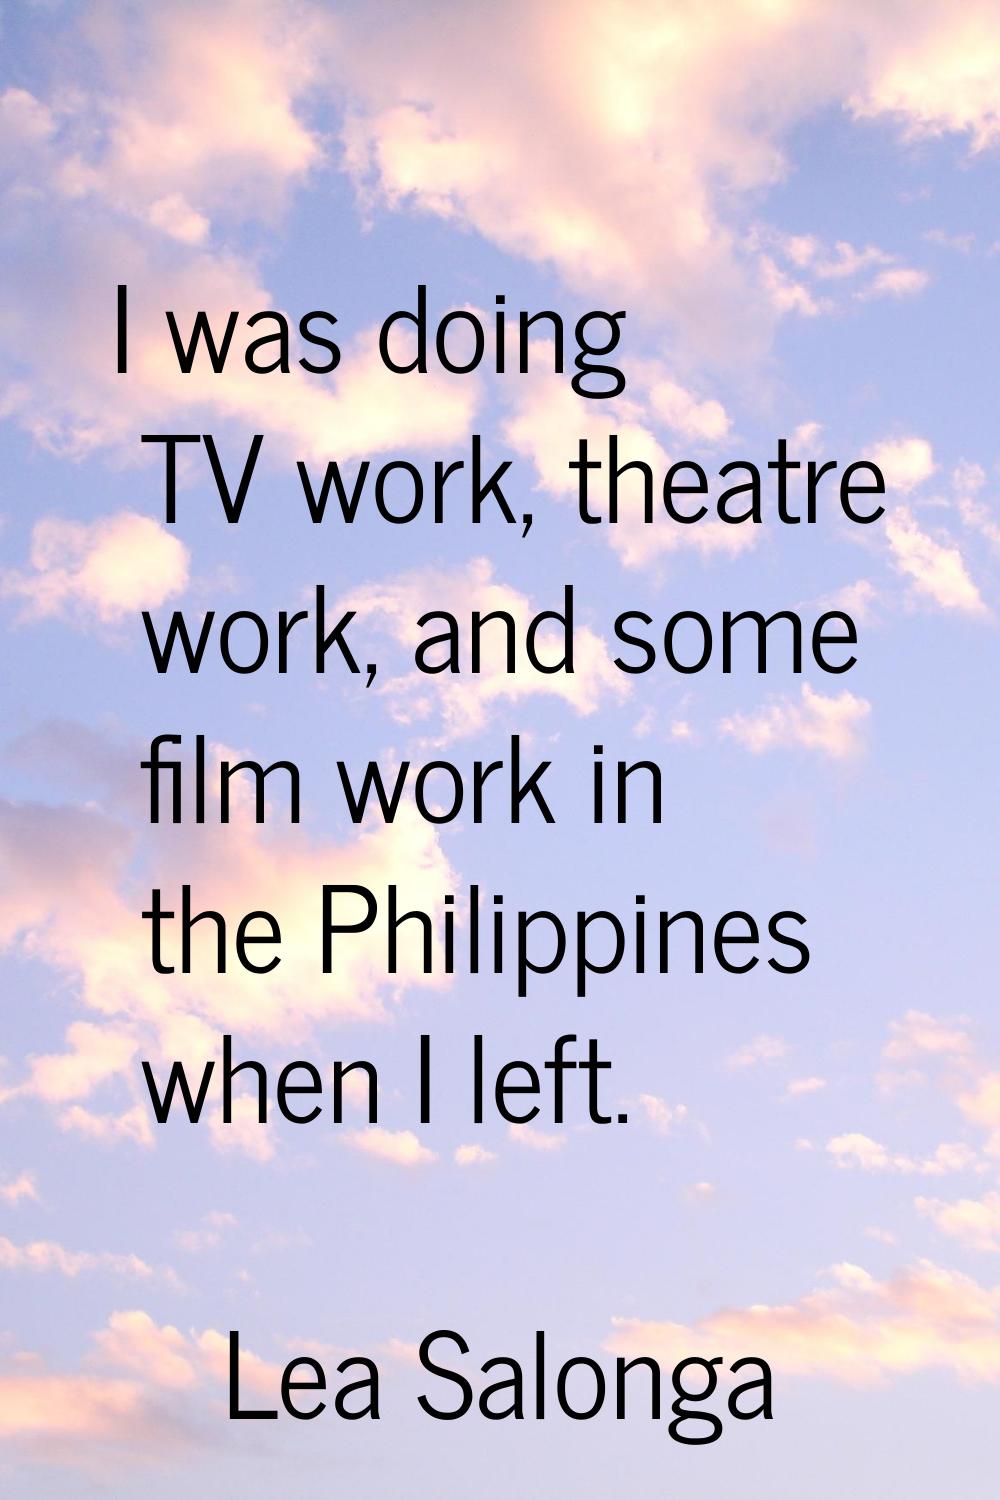 I was doing TV work, theatre work, and some film work in the Philippines when I left.